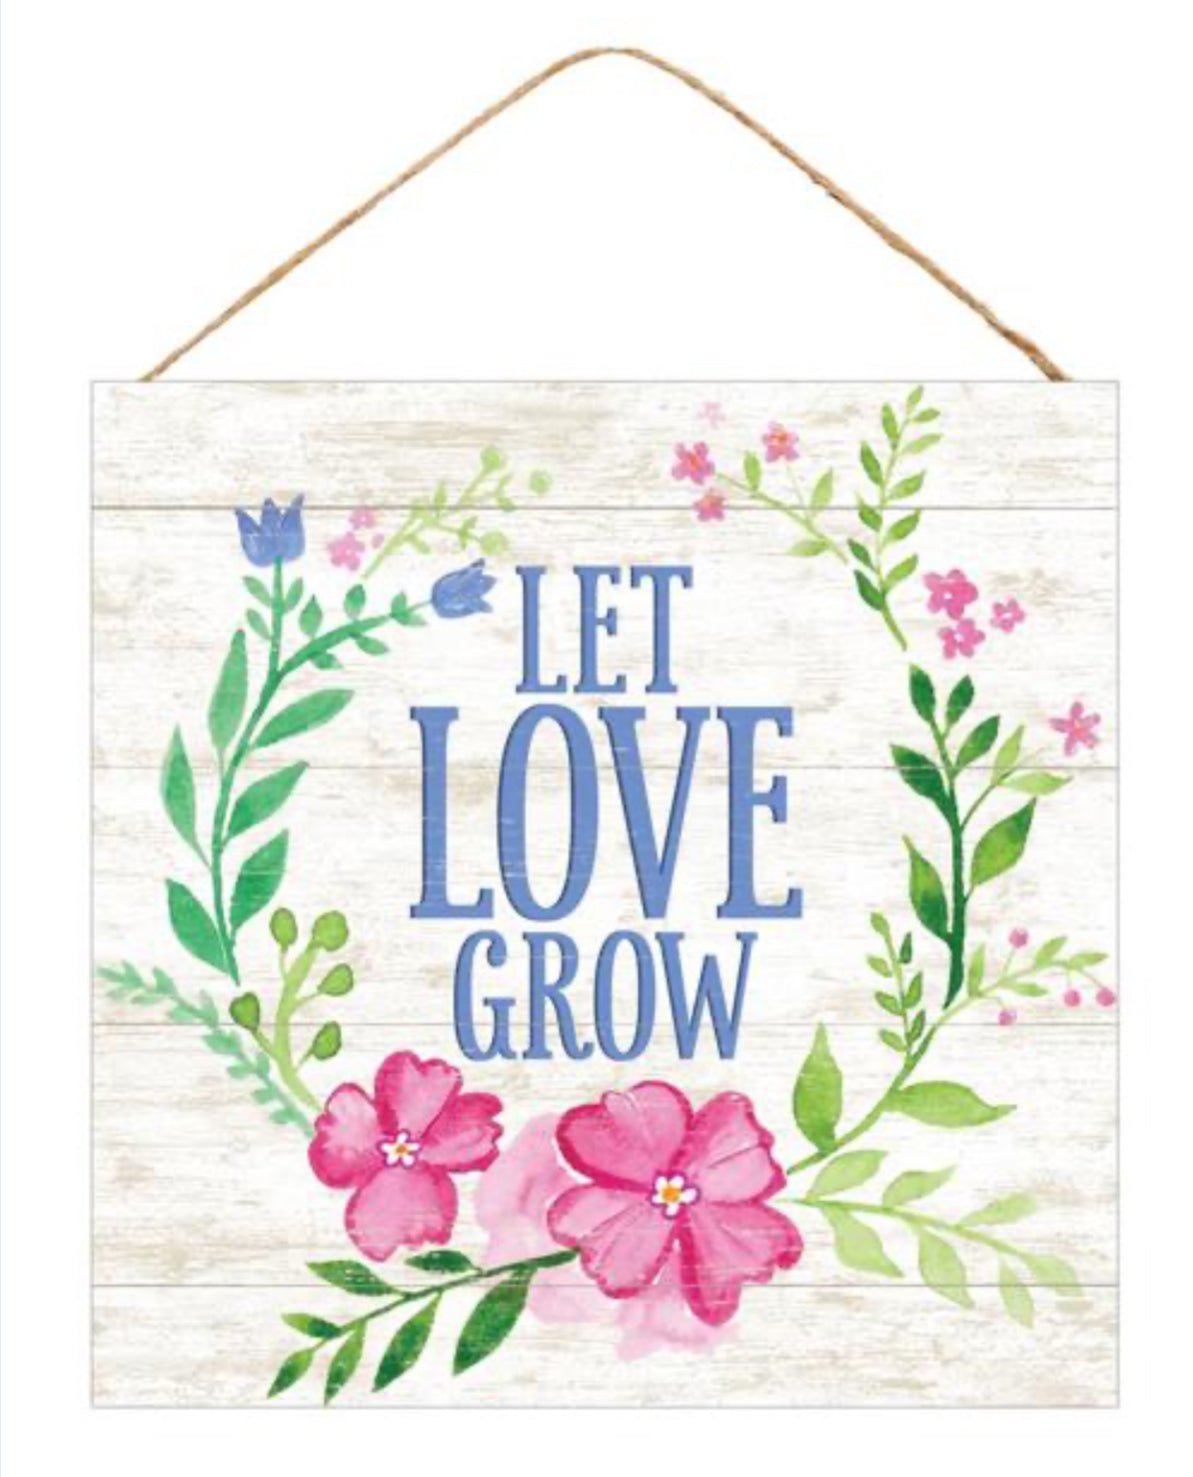 Pink floral love grows here sign with flowers - Greenery Marketsigns for wreathsAp8425